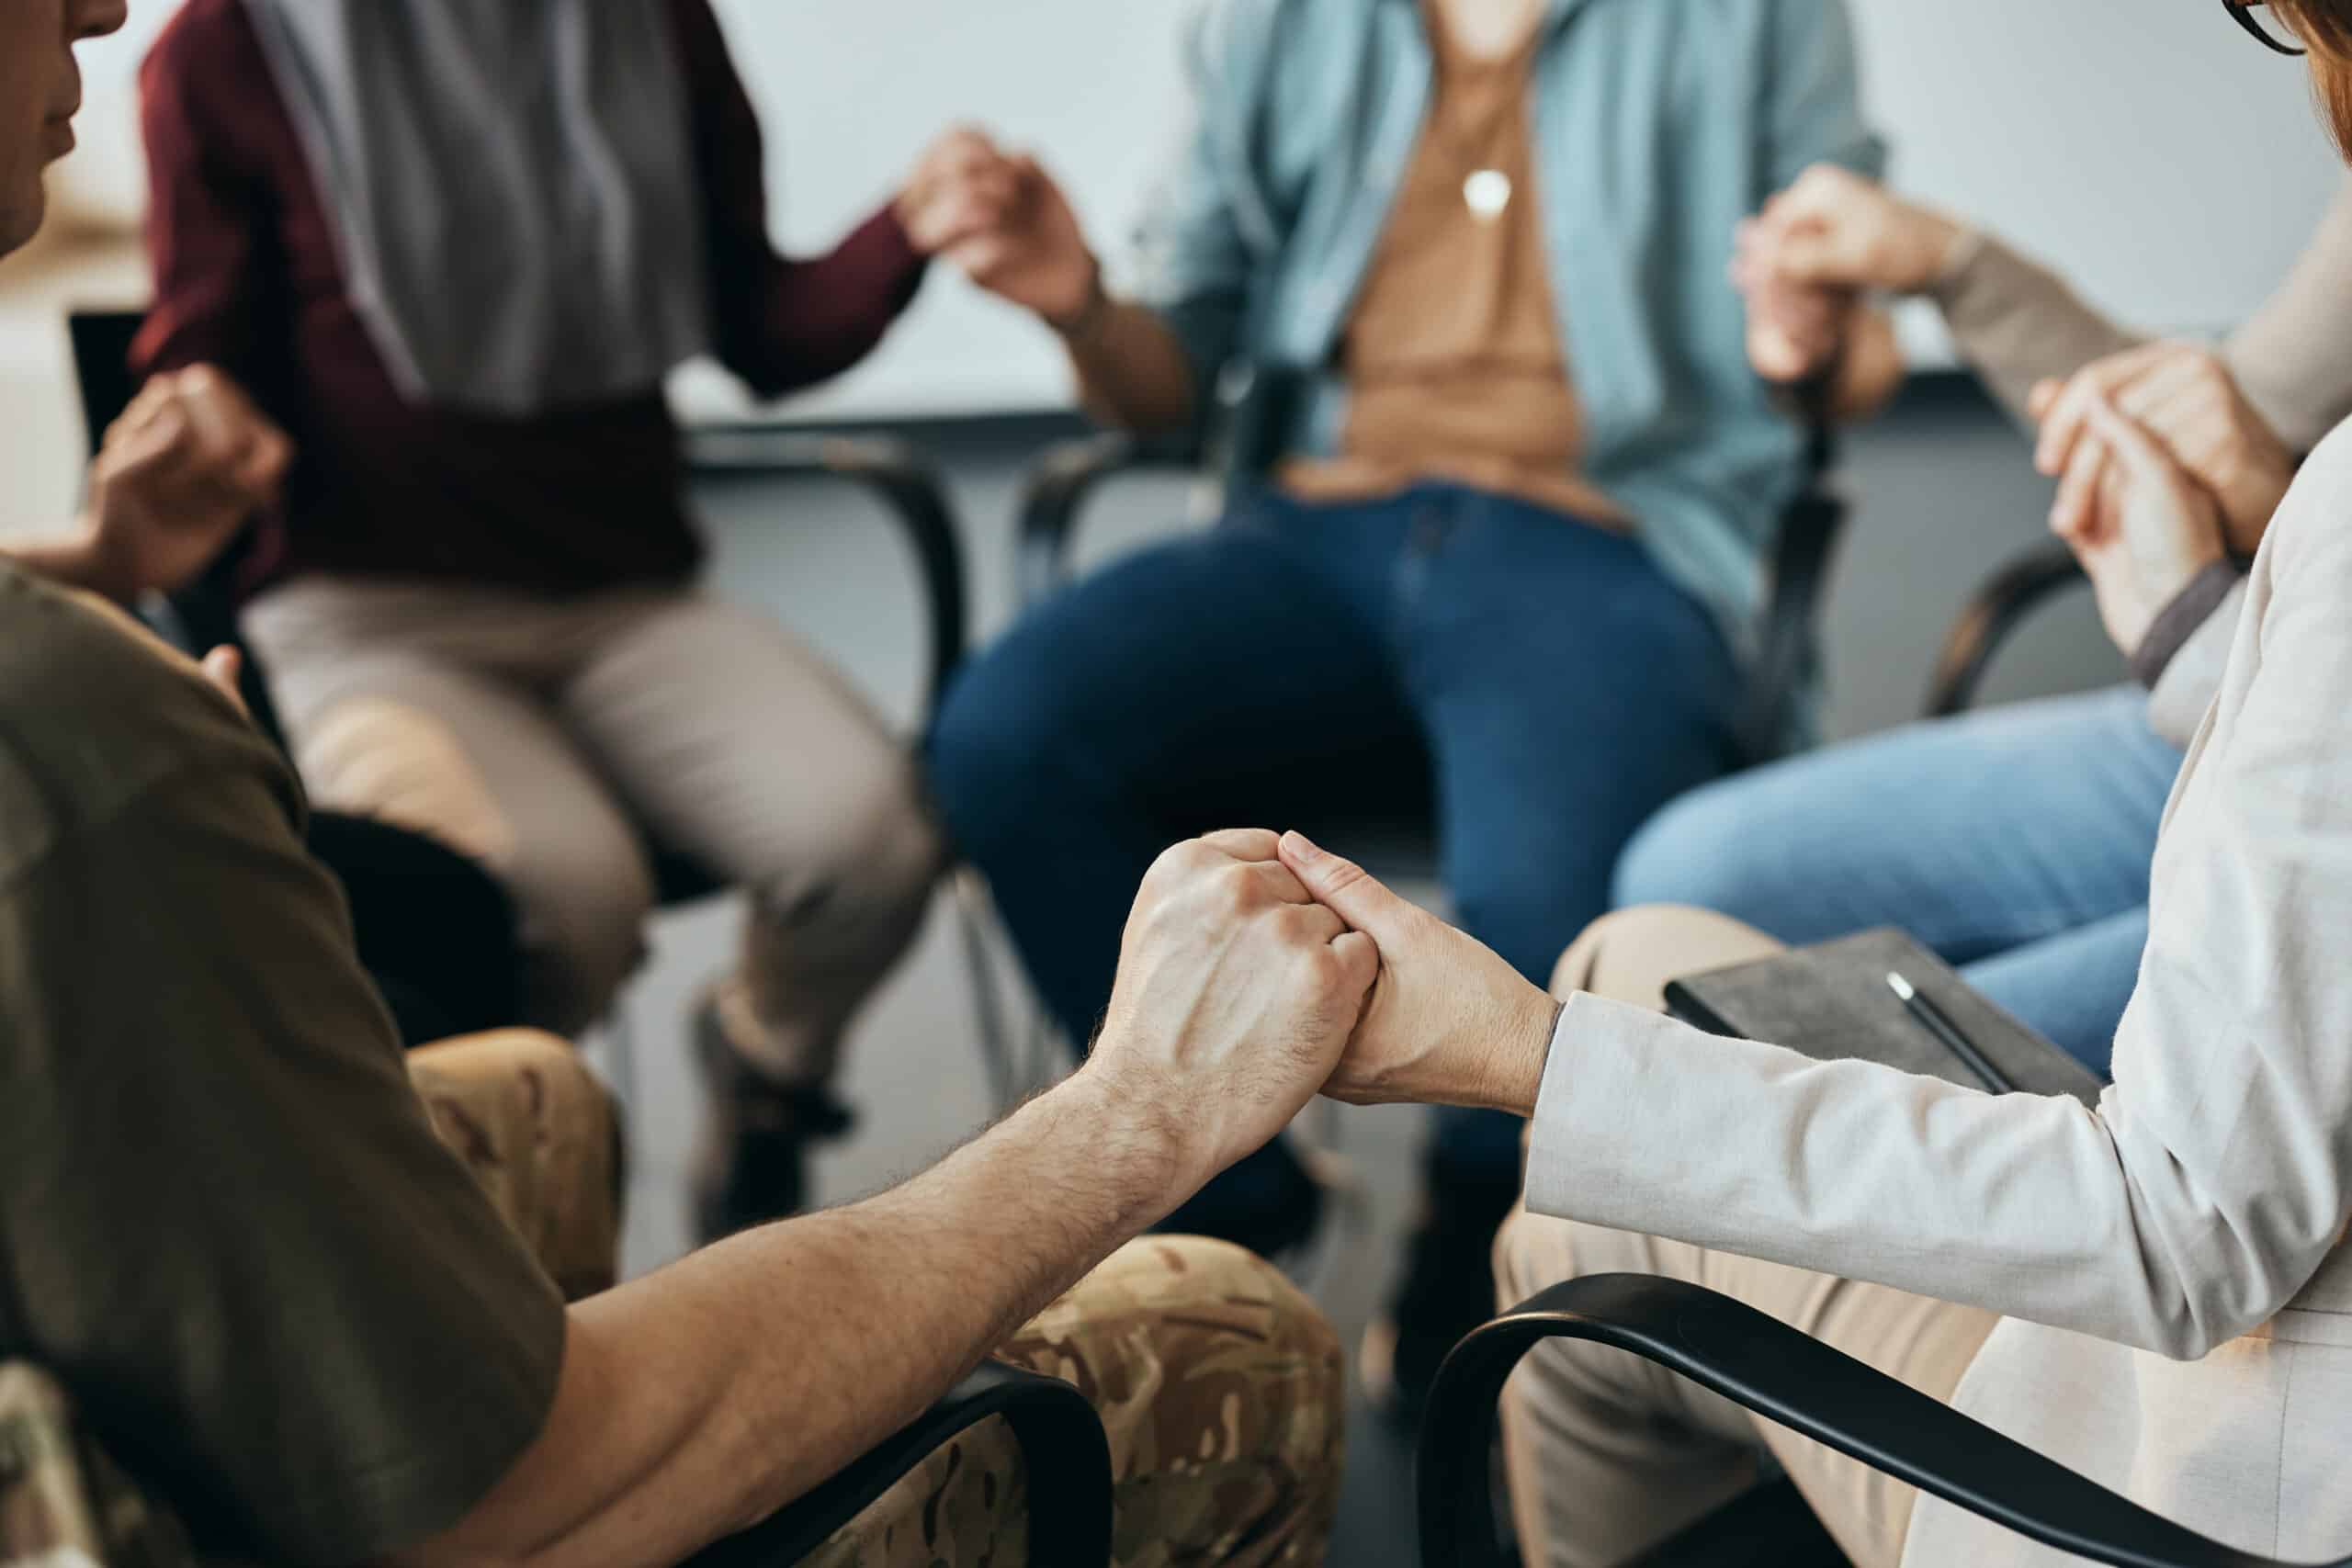 alcohol abuse self-assessment | close up of group therapy attenders holding hands 2023 02 02 20 29 08 utc scaled